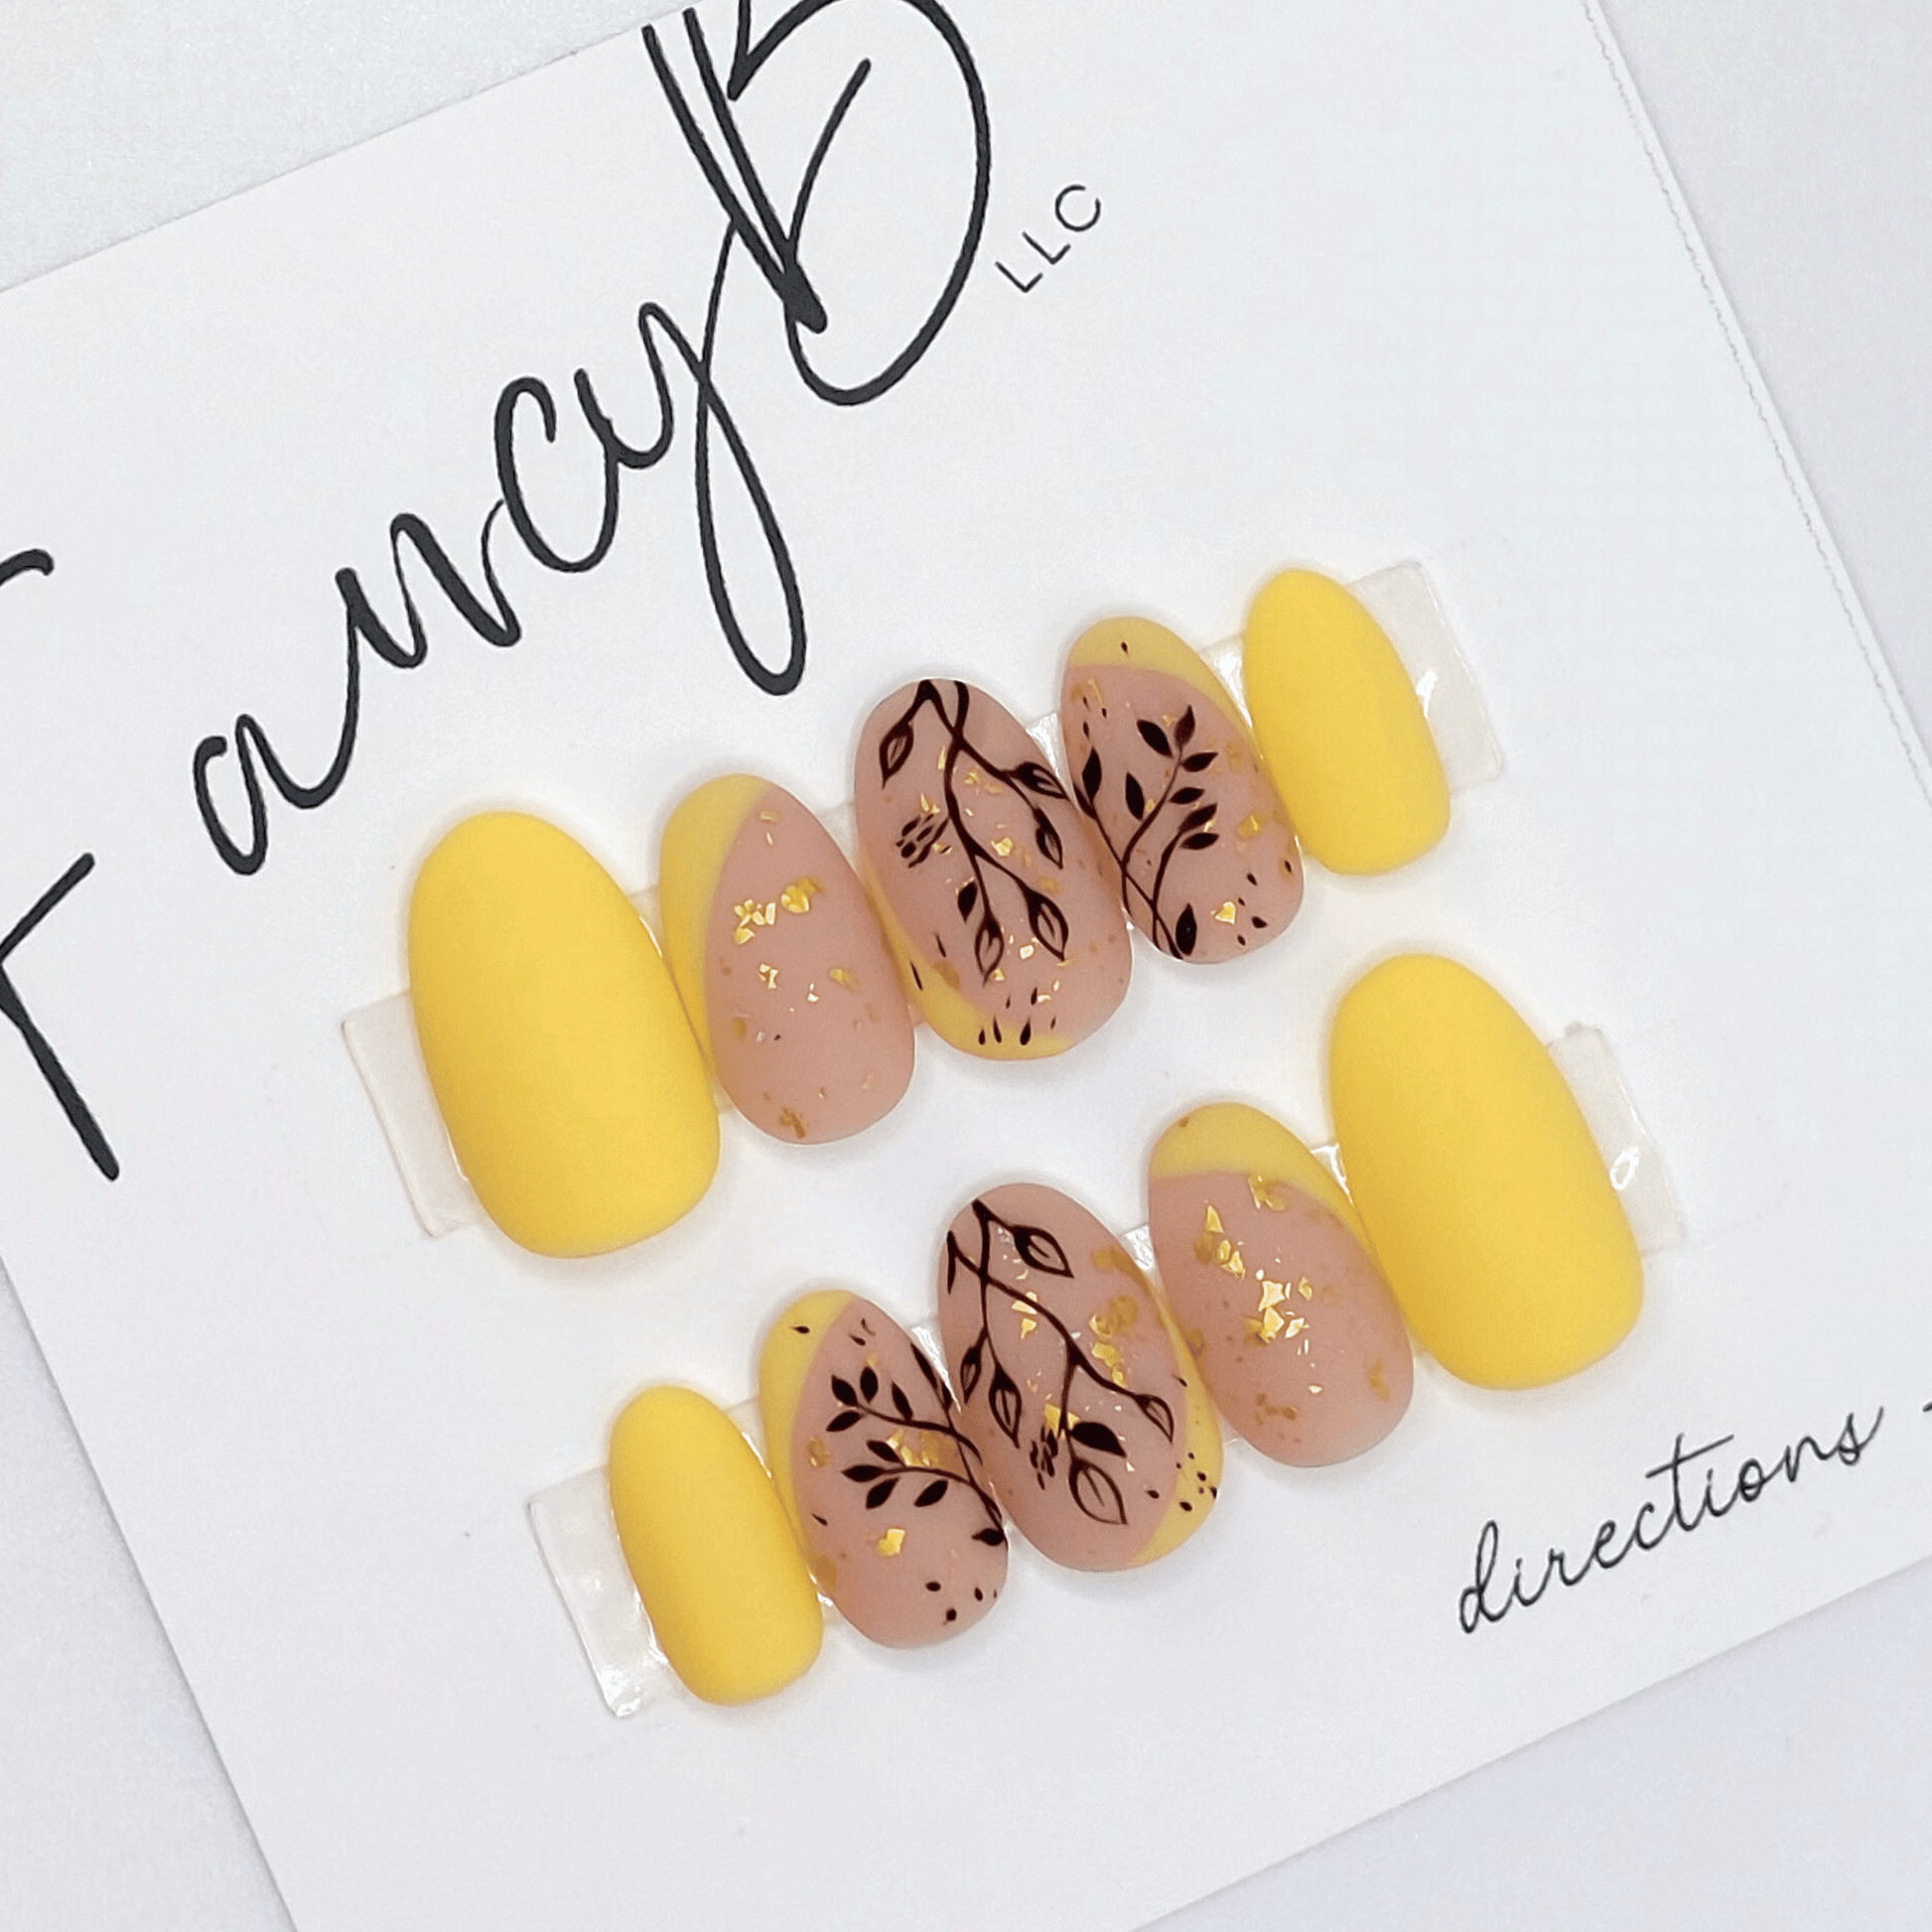 Custom press on nails with light yellow french tips, black floral designs, gold flakes, and a nude base with matte finish and short oval shape. Custom nails from FancyB.